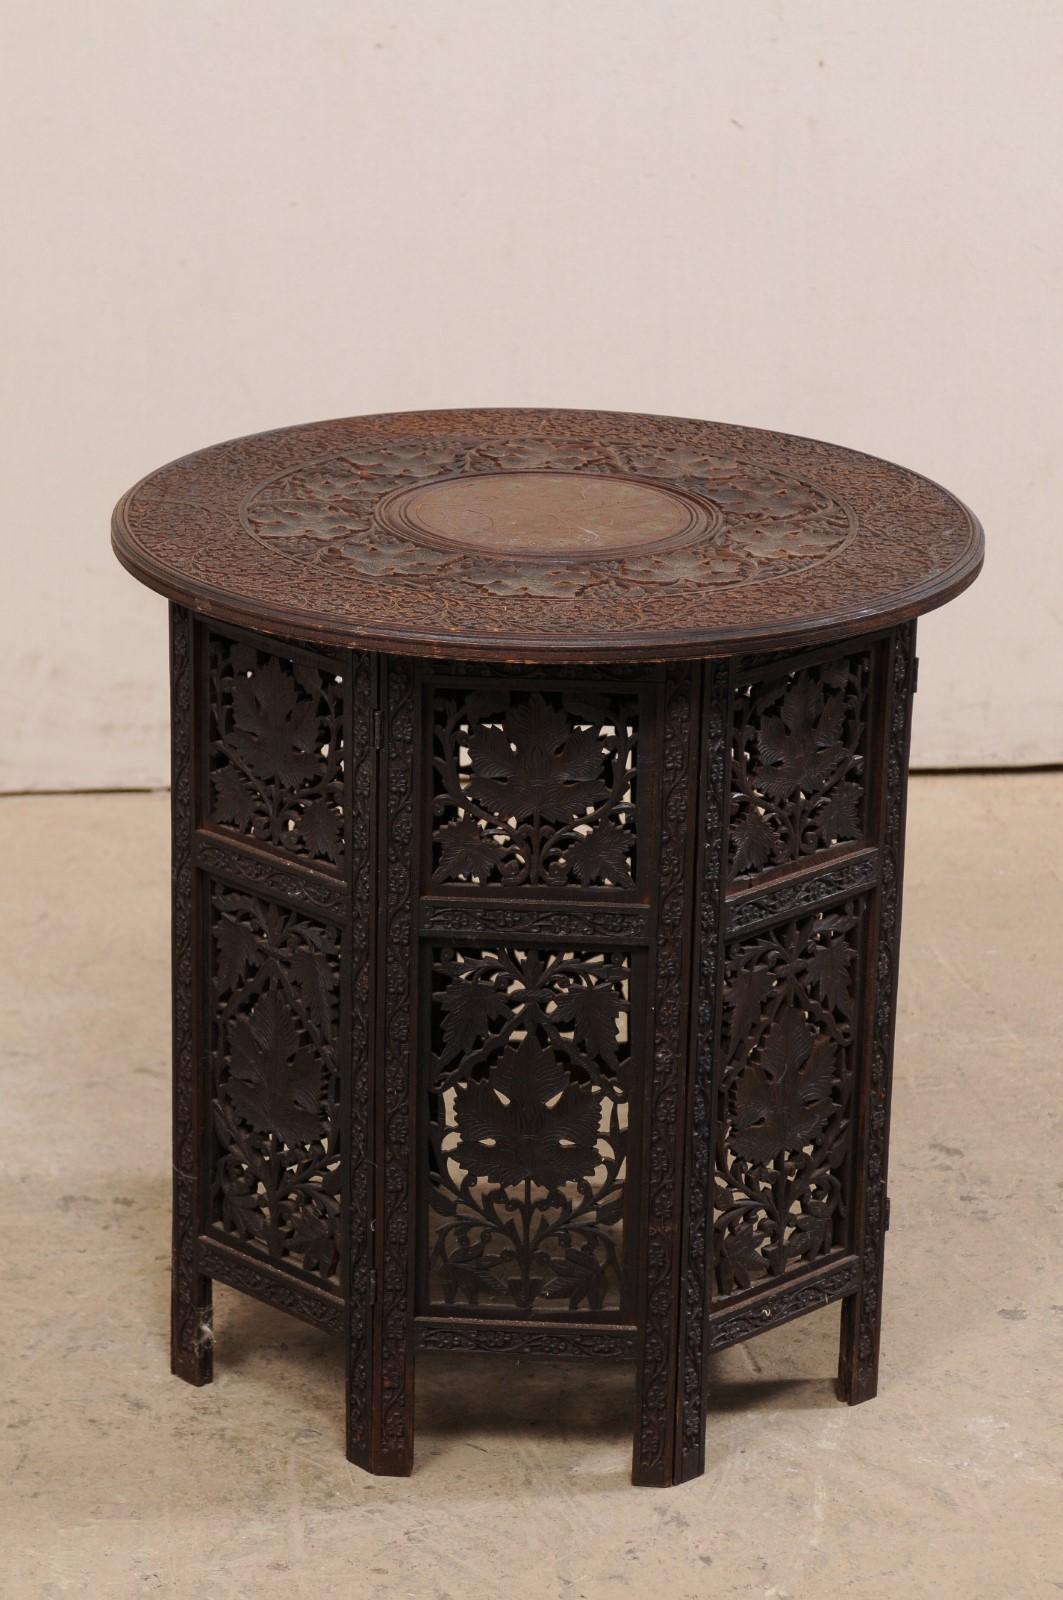 20th Century Hand Carved Round Anglo-Indian Tea or Side Table, Vining Foliage Motif